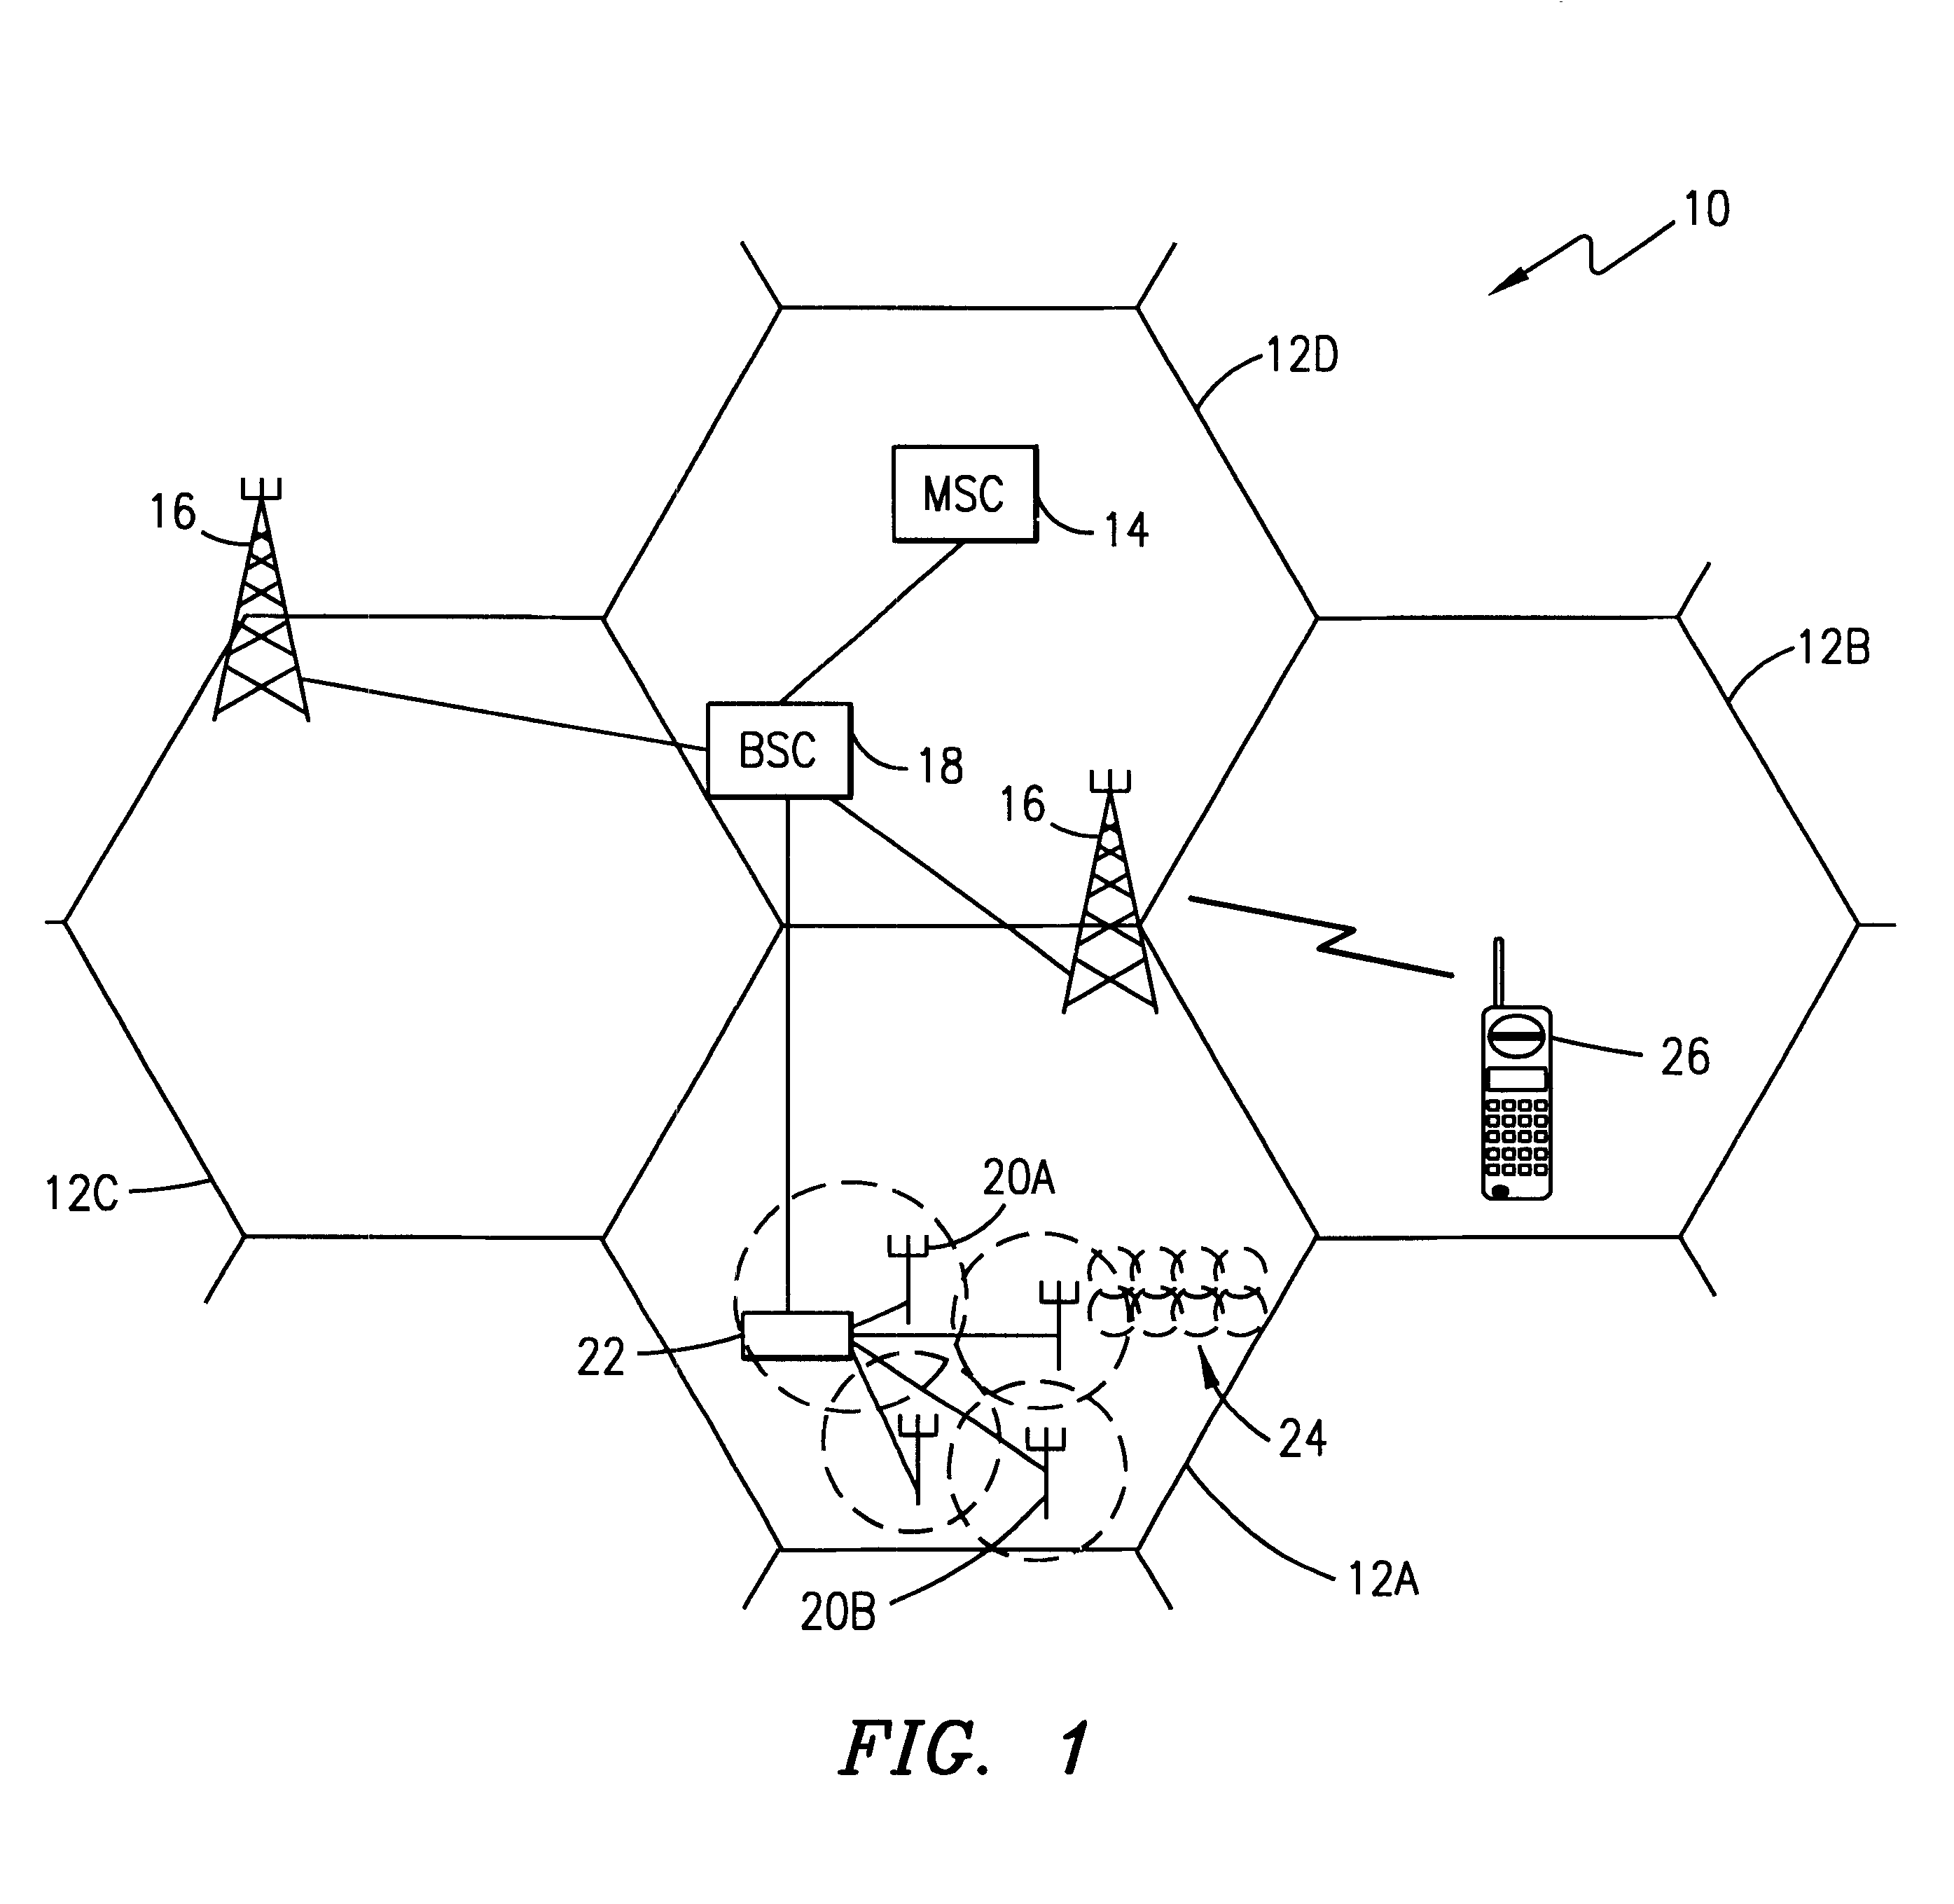 Method and system for autonomously allocating frequencies to a radio system sharing frequencies with an overlapping macro radio system